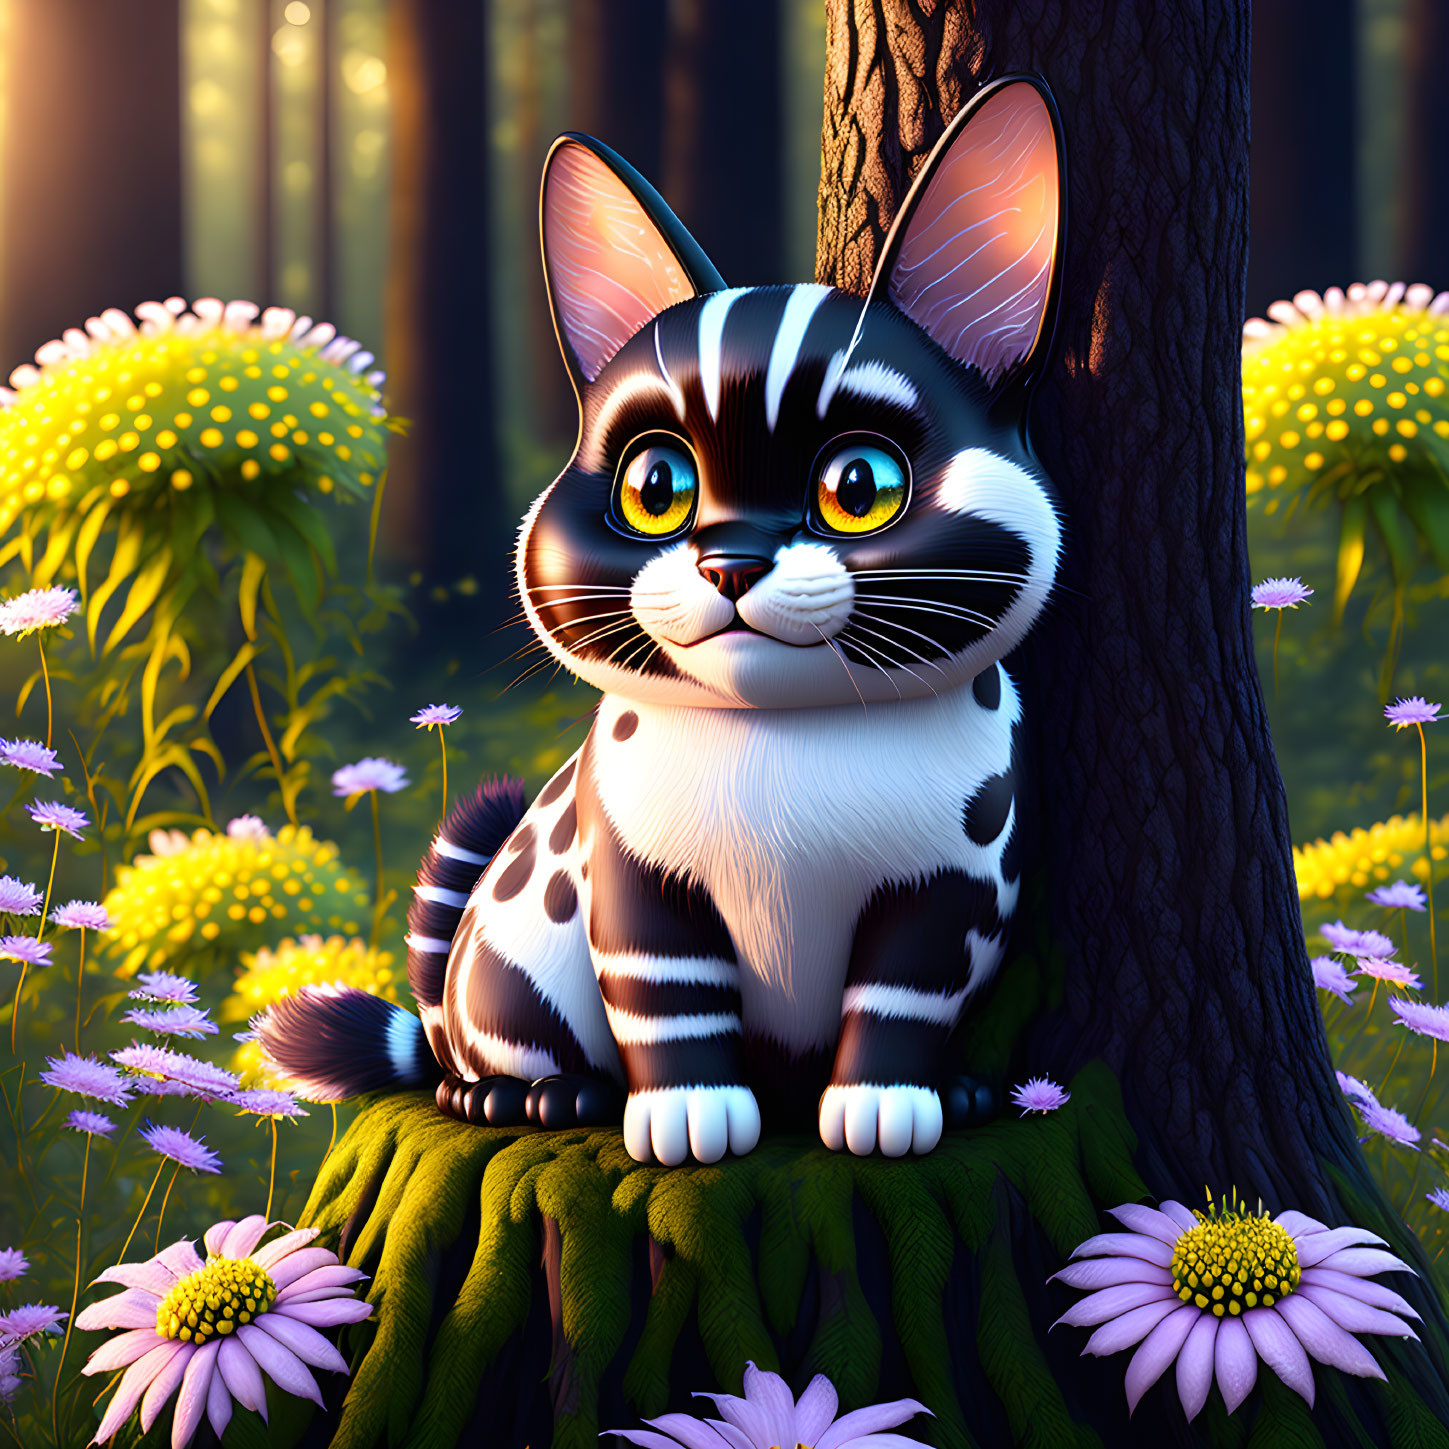 Large-eyed animated cat on tree stump in sunlit forest with purple and yellow flowers